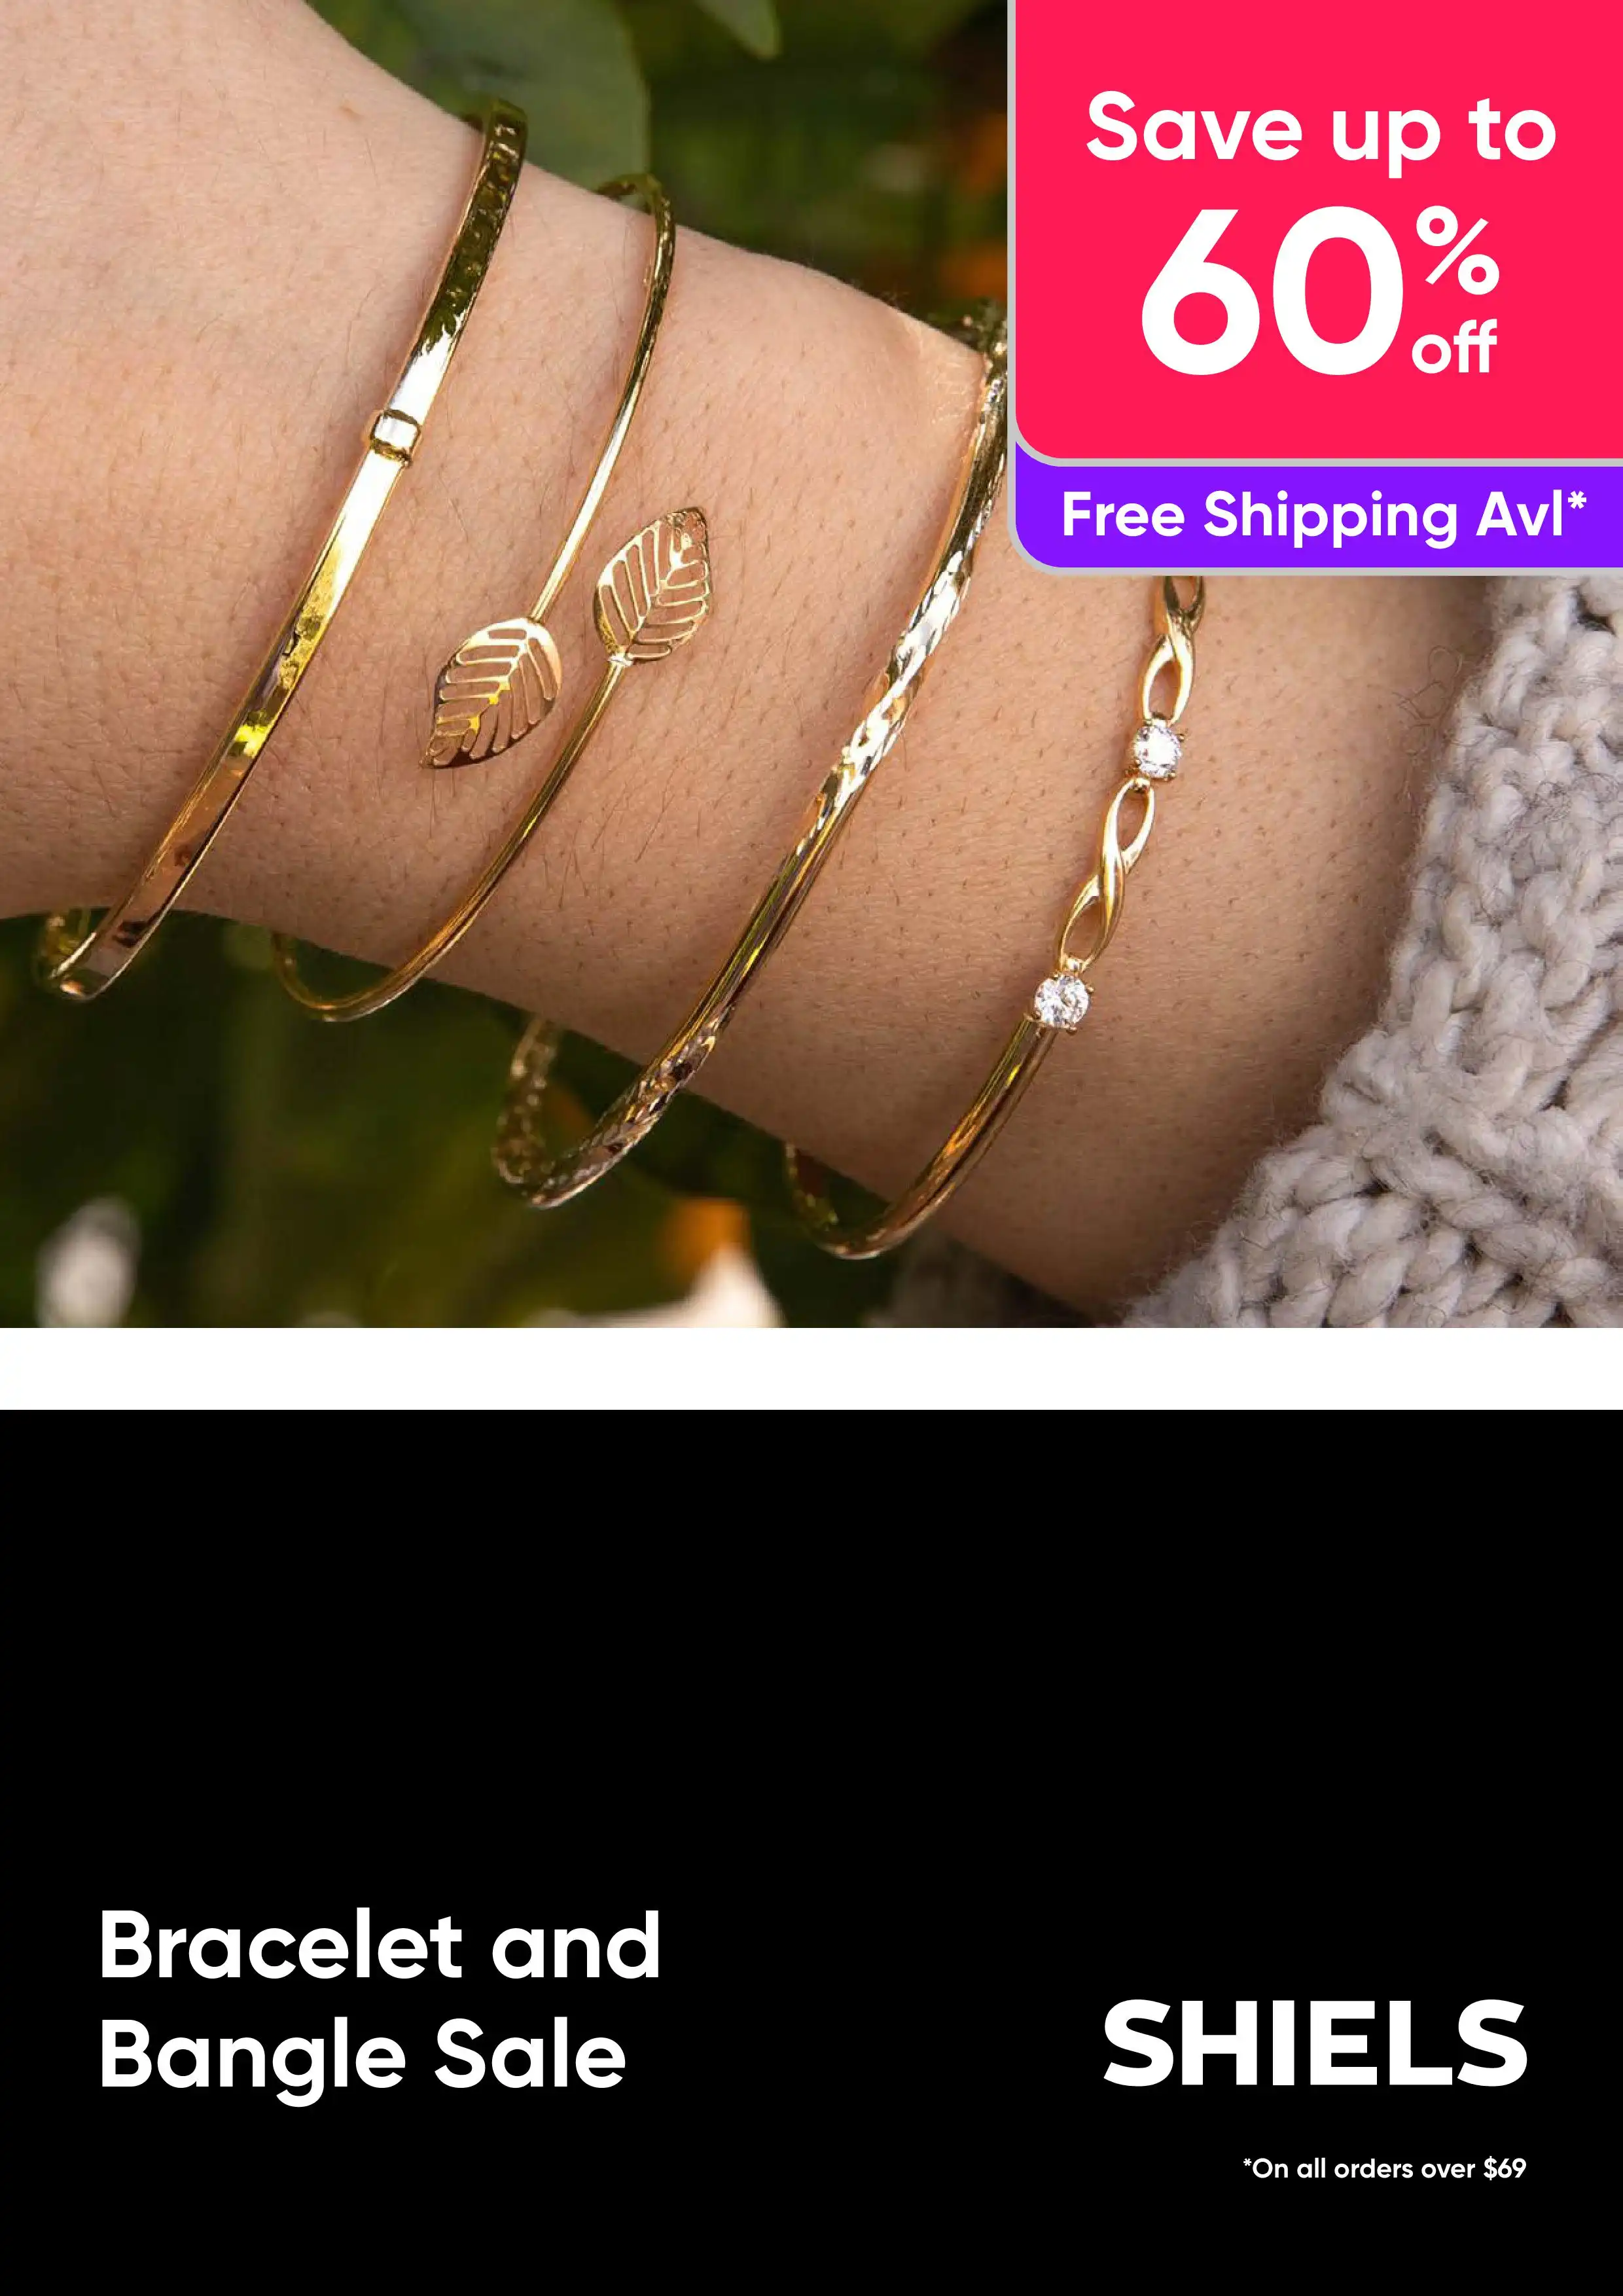 Shiels - Bracelets and Bangles - Up to 60% Off